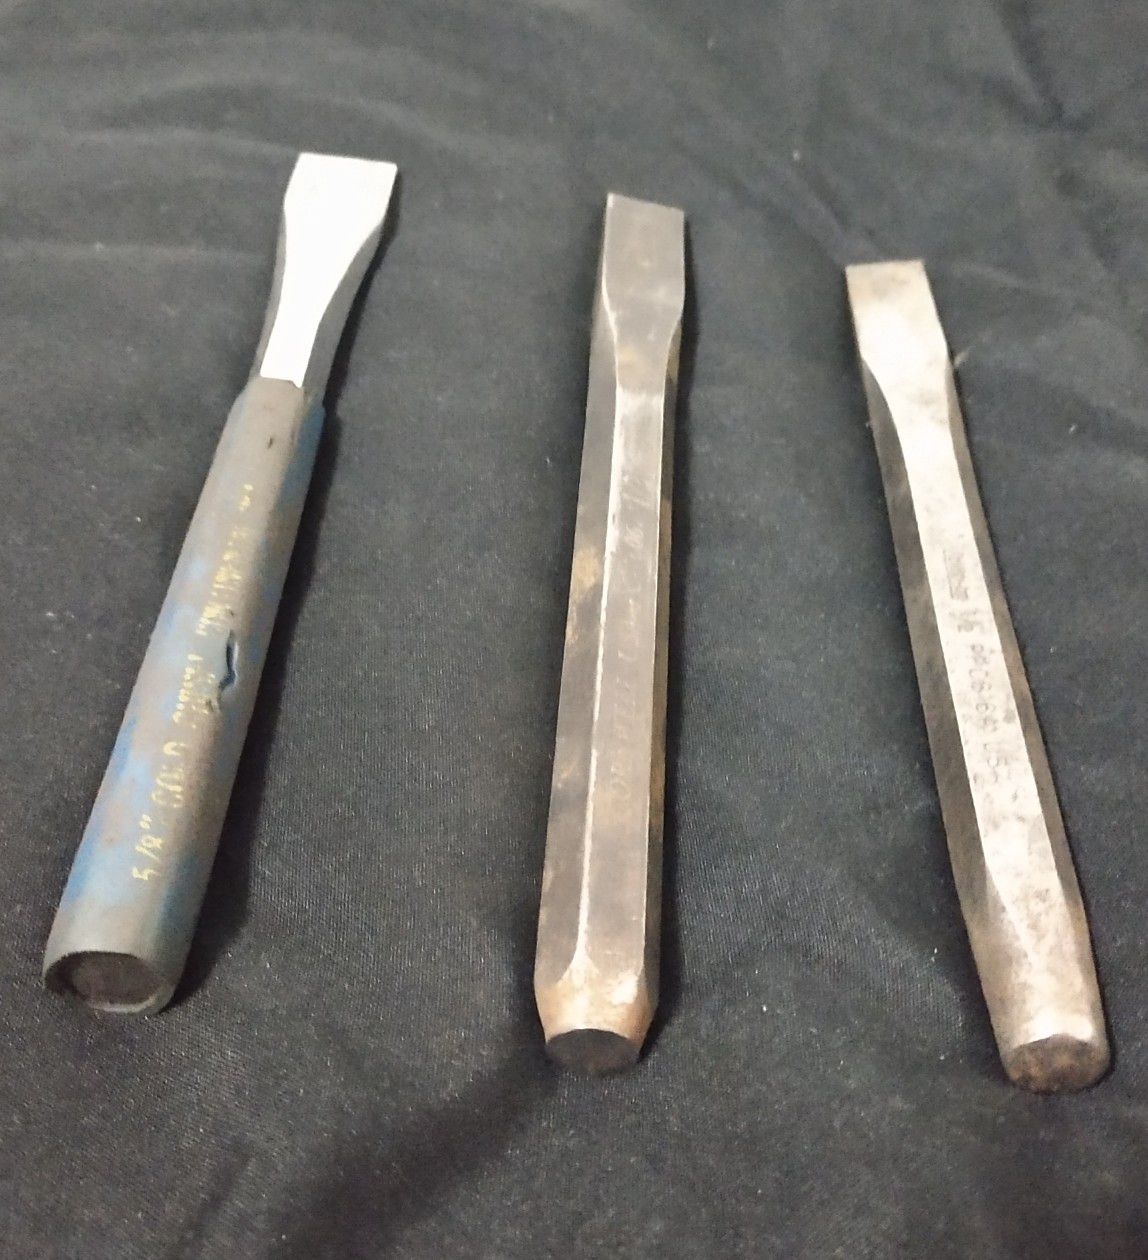 1 Snapon 1/2", 1 unbranded 1/2", 1 can't read name 5/8" chisels